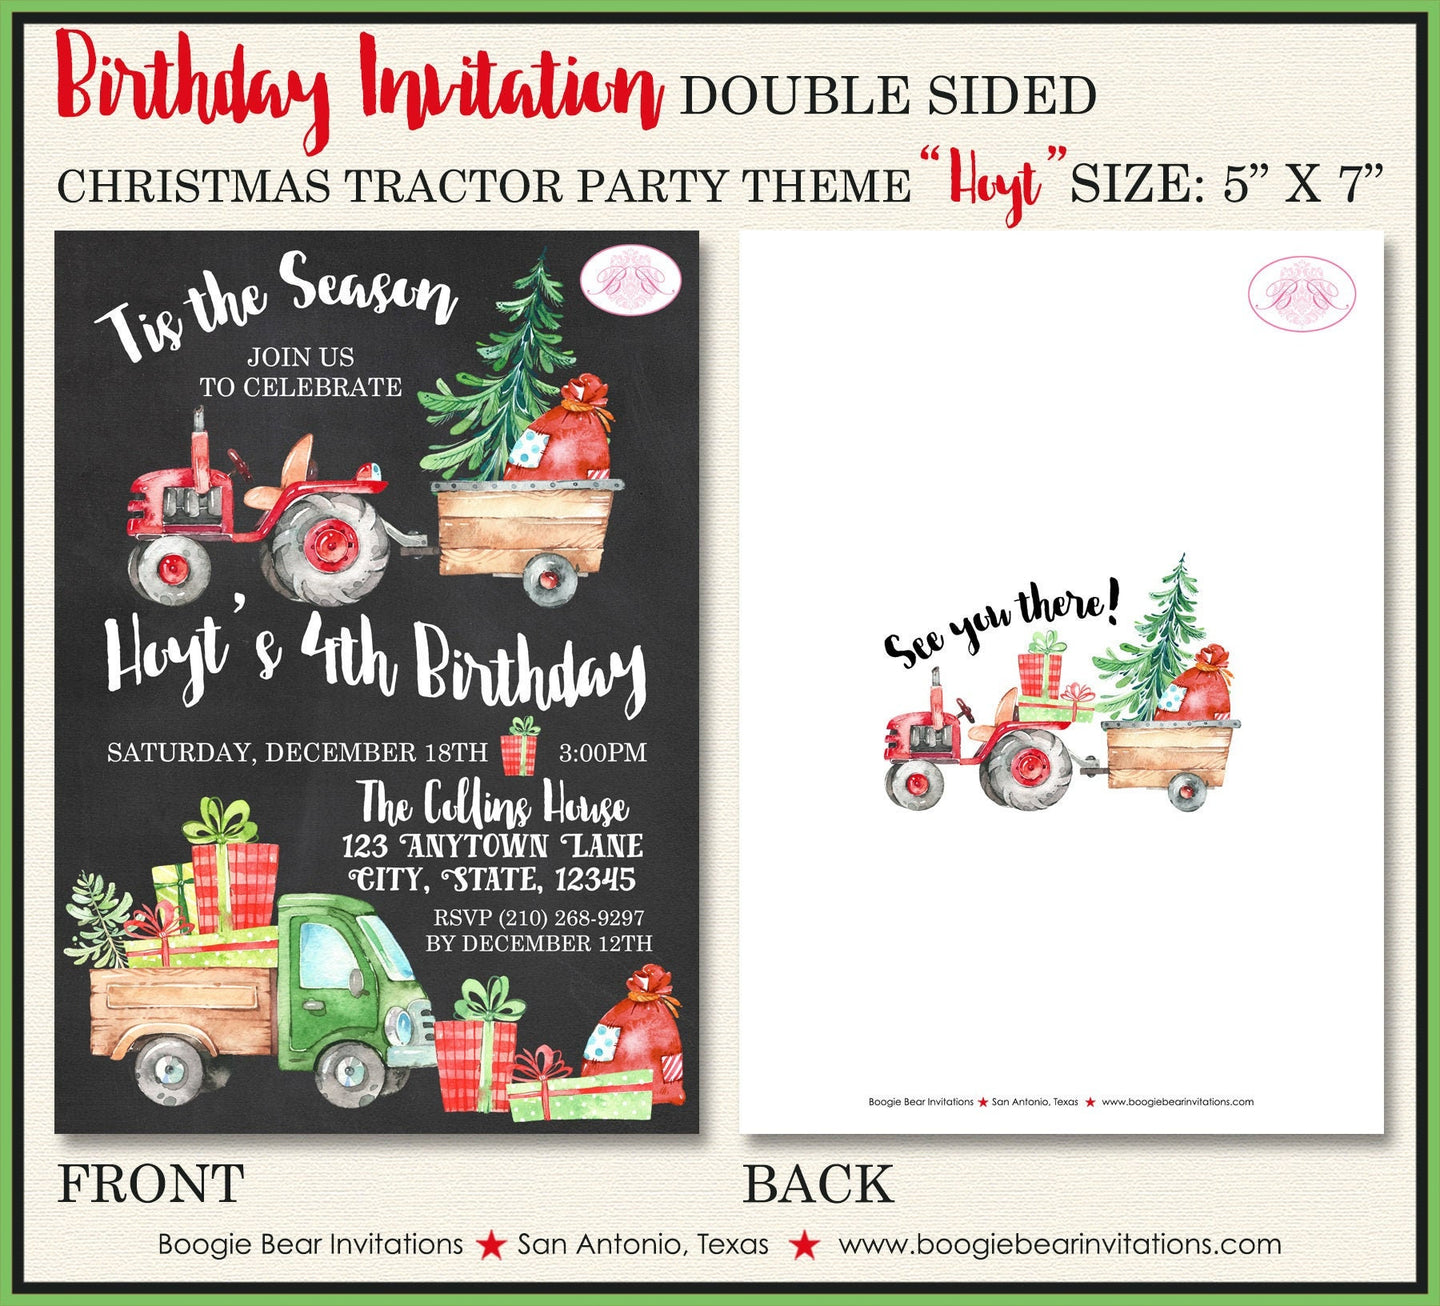 Christmas Tractor Birthday Party Invitation Truck Red Green Tree Chalkboard Farm Country Trailer Boogie Bear Invitations Hoyt Theme Printed